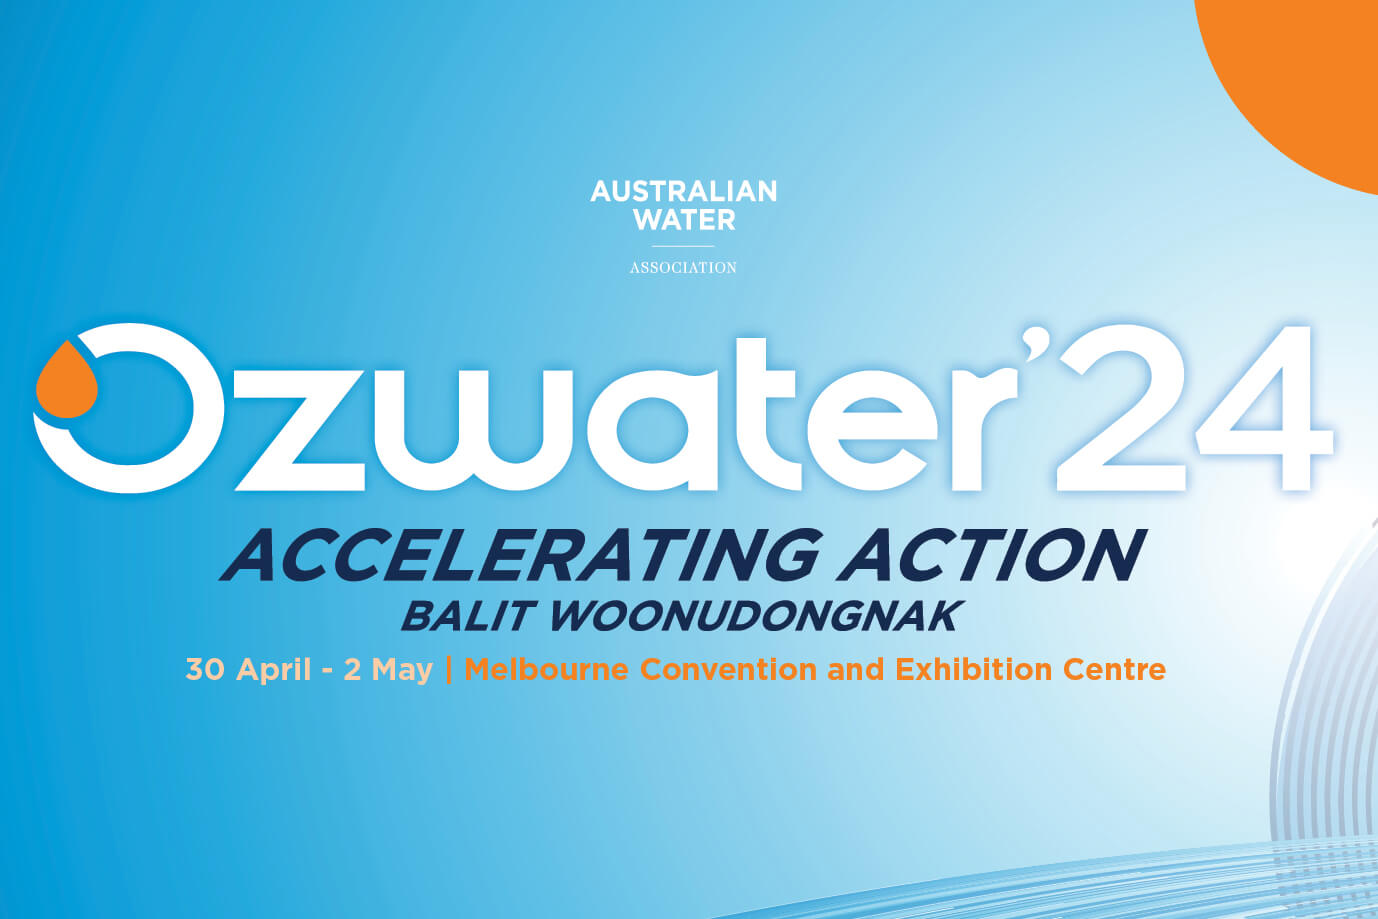 ozwater | zhulin carbon